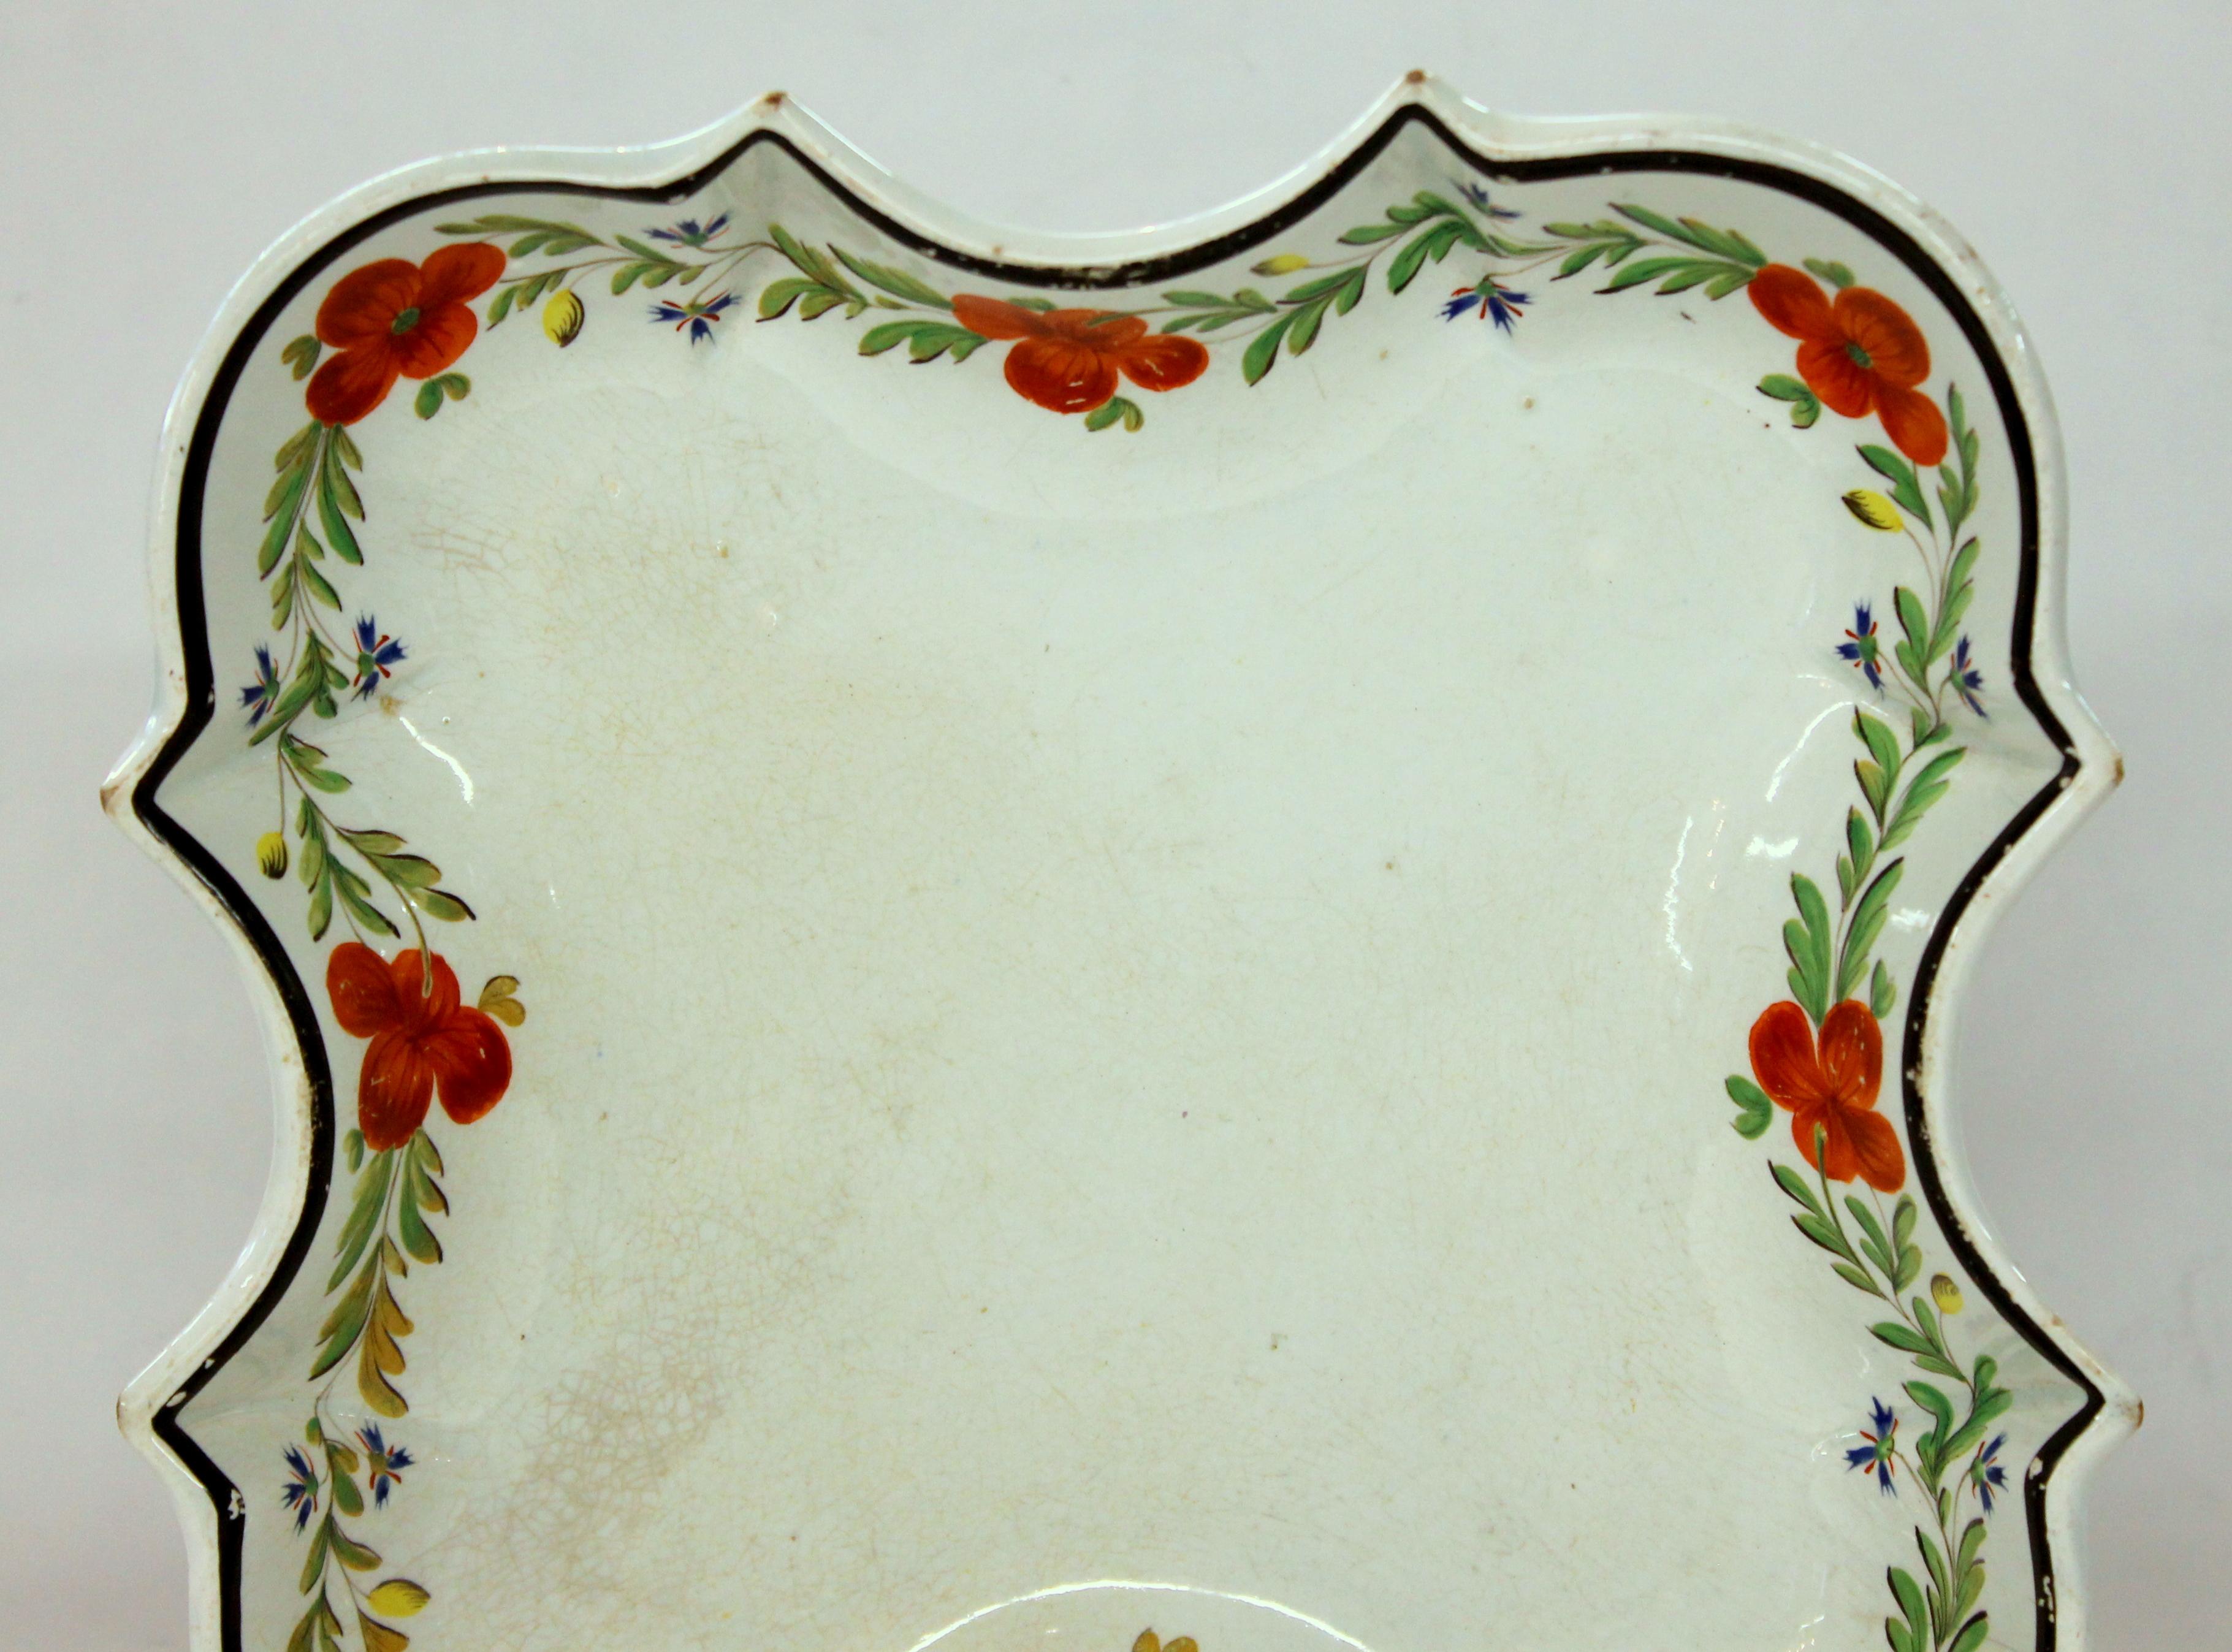 Very rare antique English J. and E. Baddeley earthenware shaped dessert dish, Shelton

Shape attributed to J. and E. Baddeley (unmarked)
Shelton, Staffordshire 
(see plate No. 2, pg. 13 of G. Godden's Encyclopedia of British Pottery and